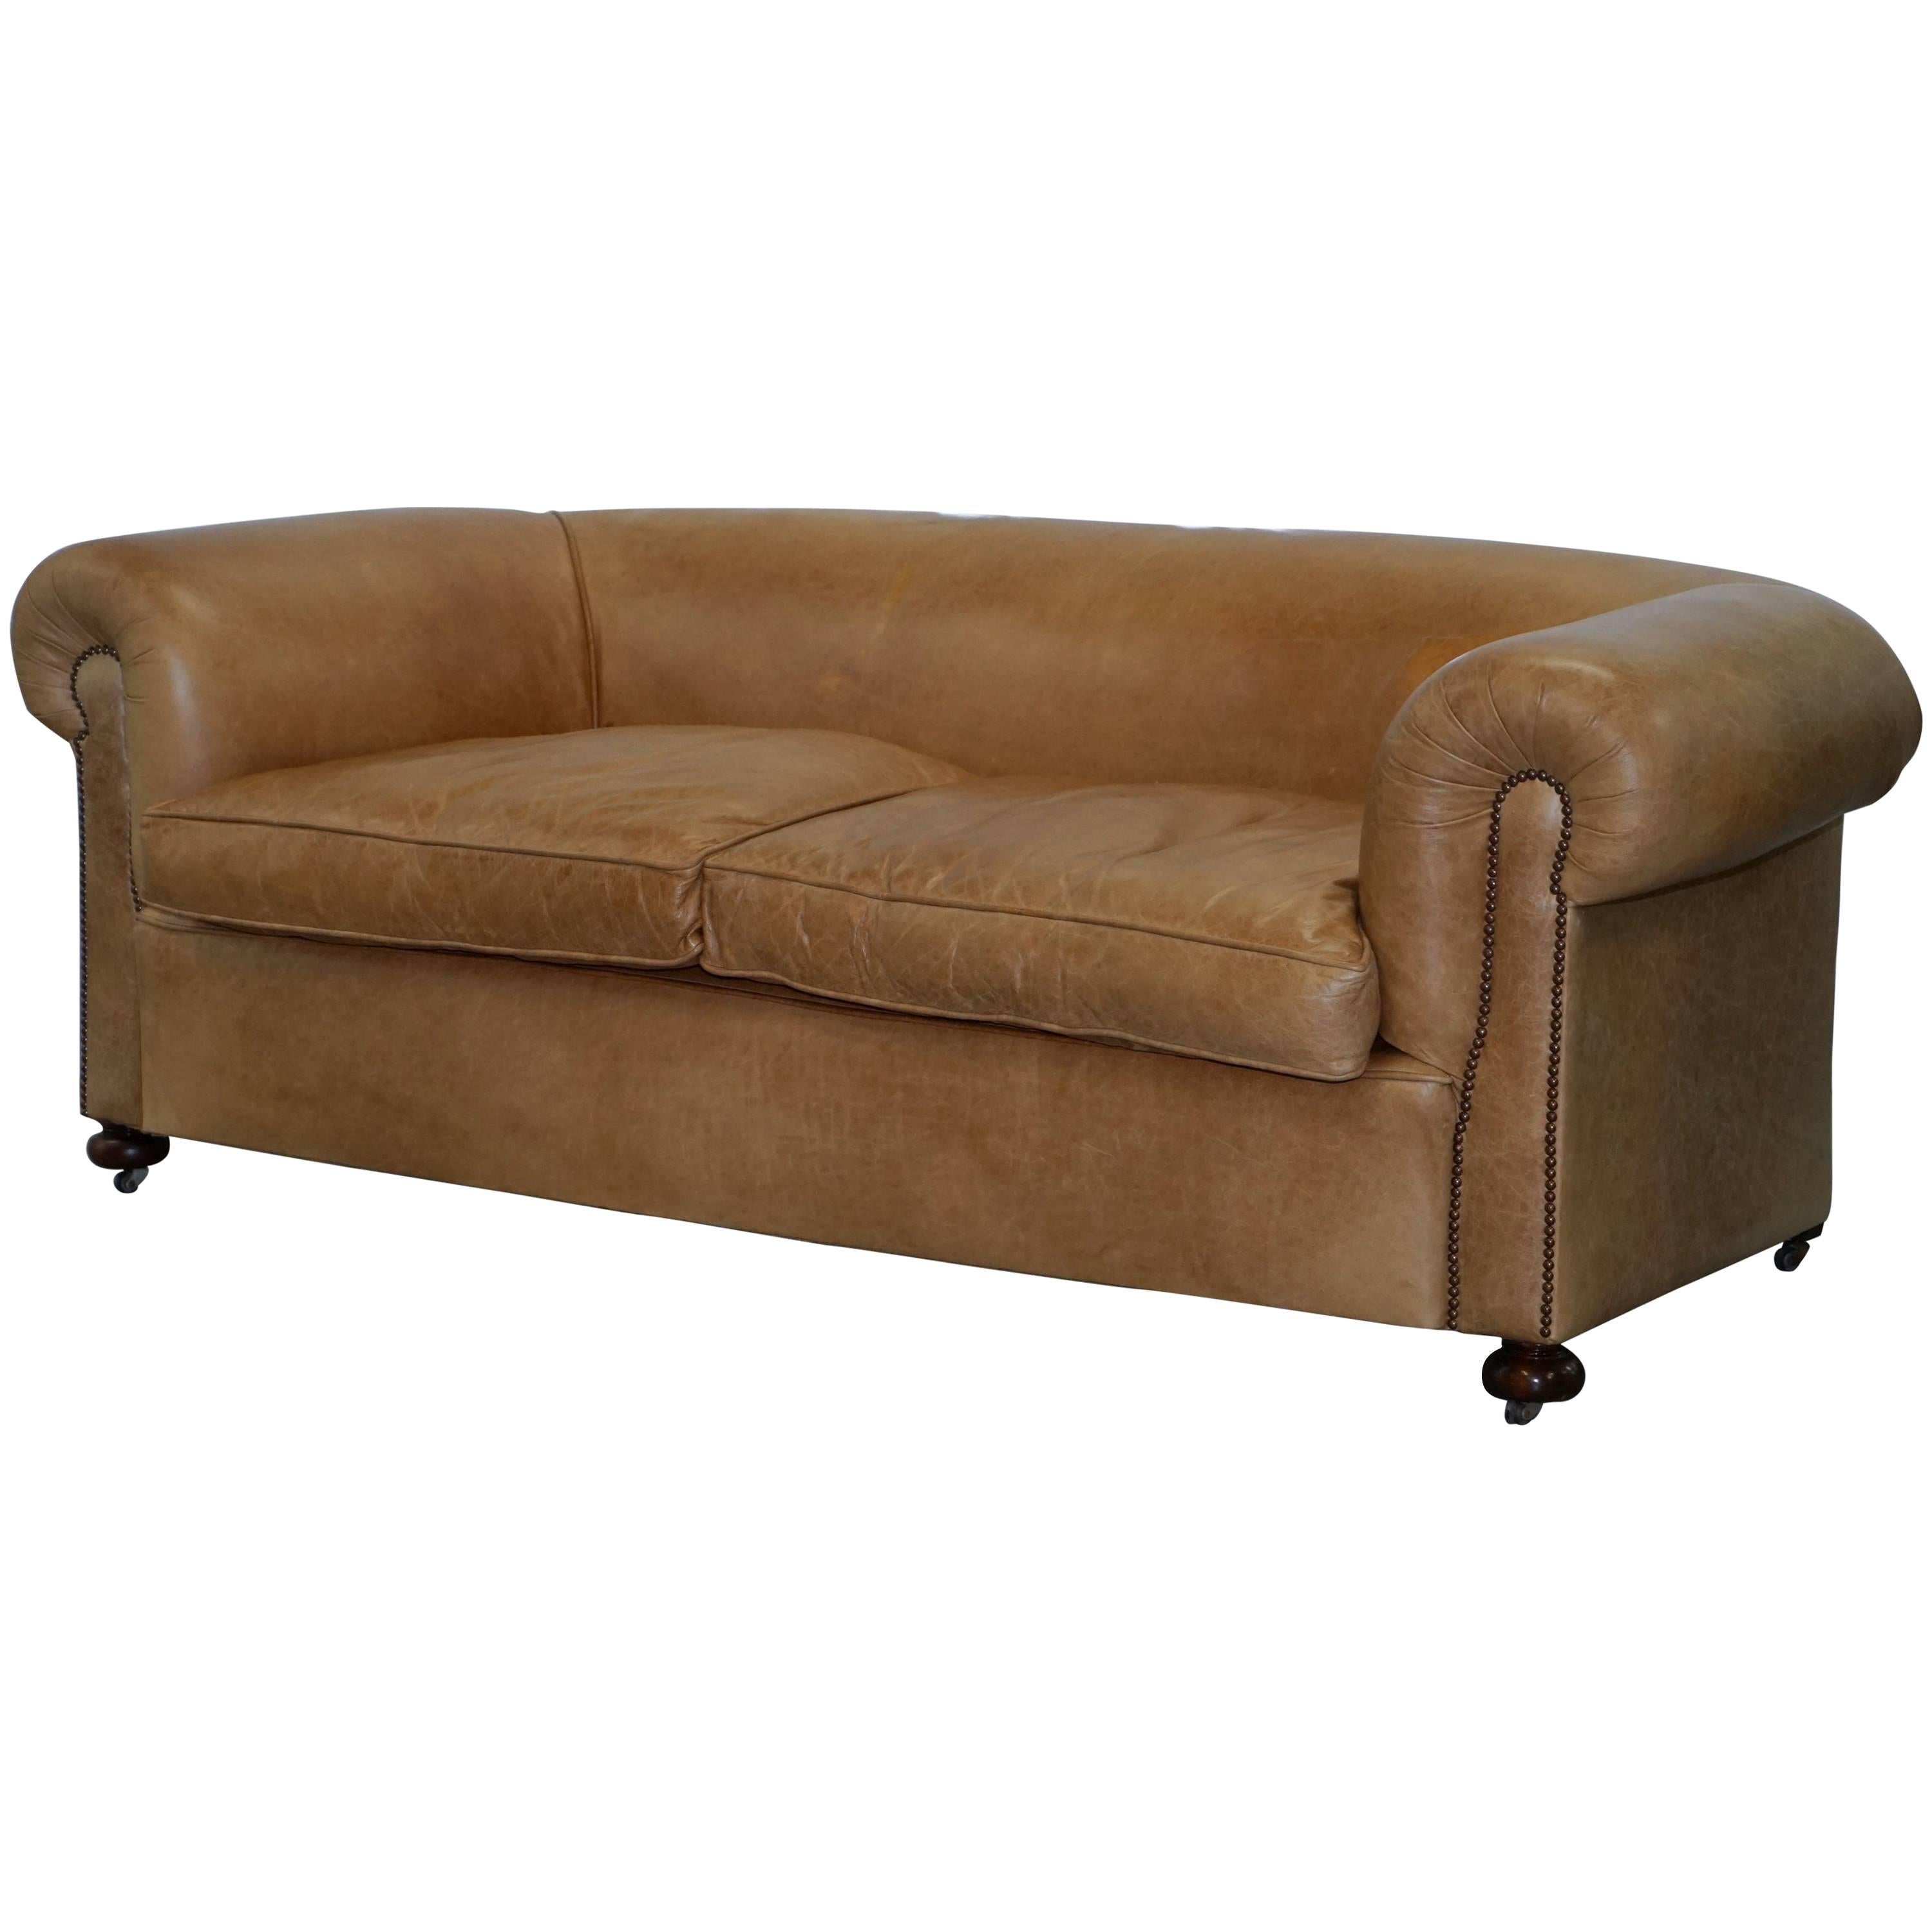 1 of 2 Vintage Victorian Style Restored Brown Leather Club Sofas Coil Sprung For Sale